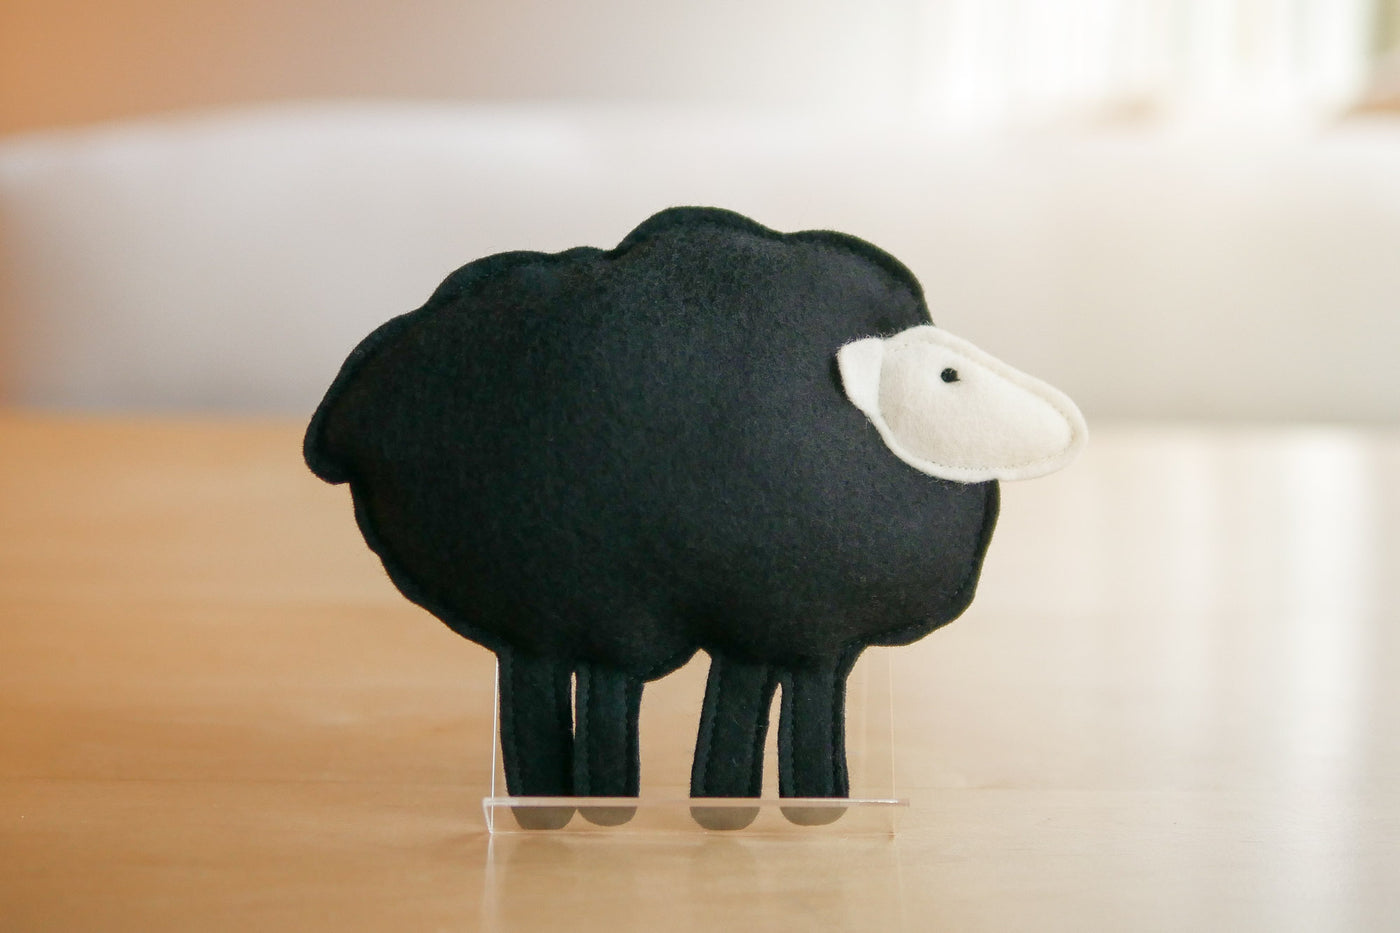 Wool sheep toy standing on holder